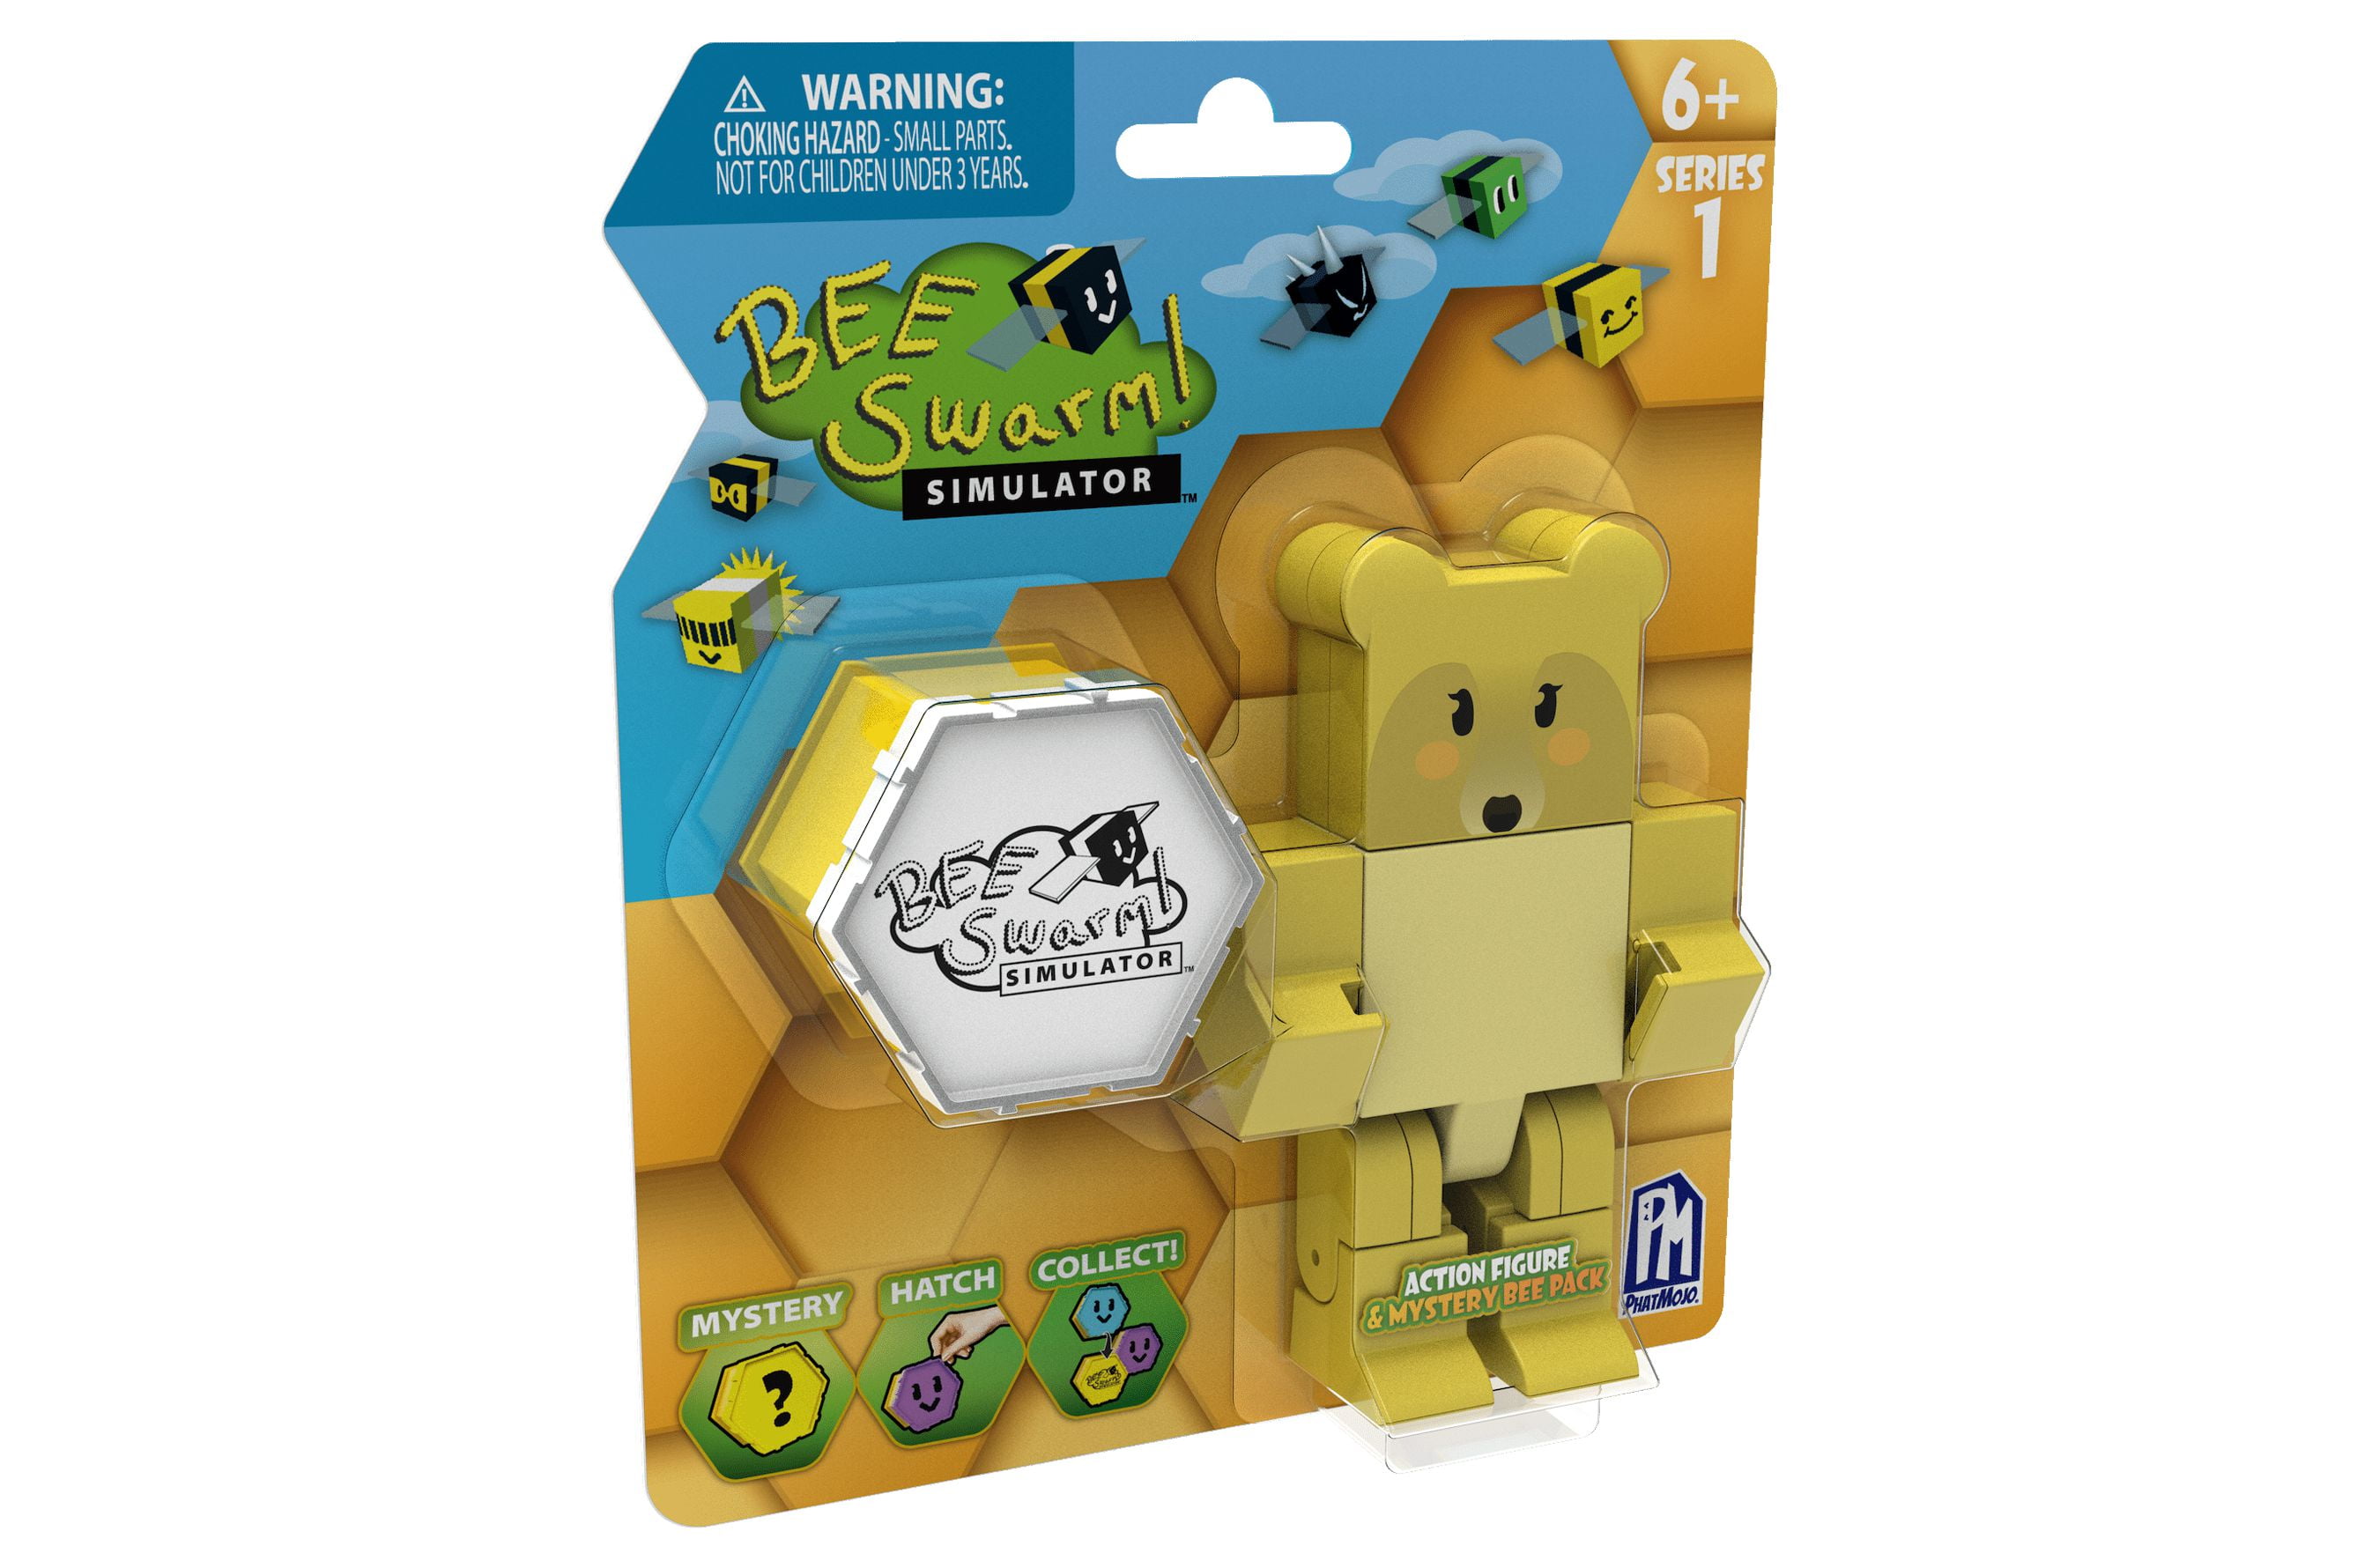  Bee Swarm Simulator – Brown Bear Action Figure Pack w/Mystery  Bee & Honeycomb Case (5” Articulated Figure & Bonus Items, Series 1) : Toys  & Games